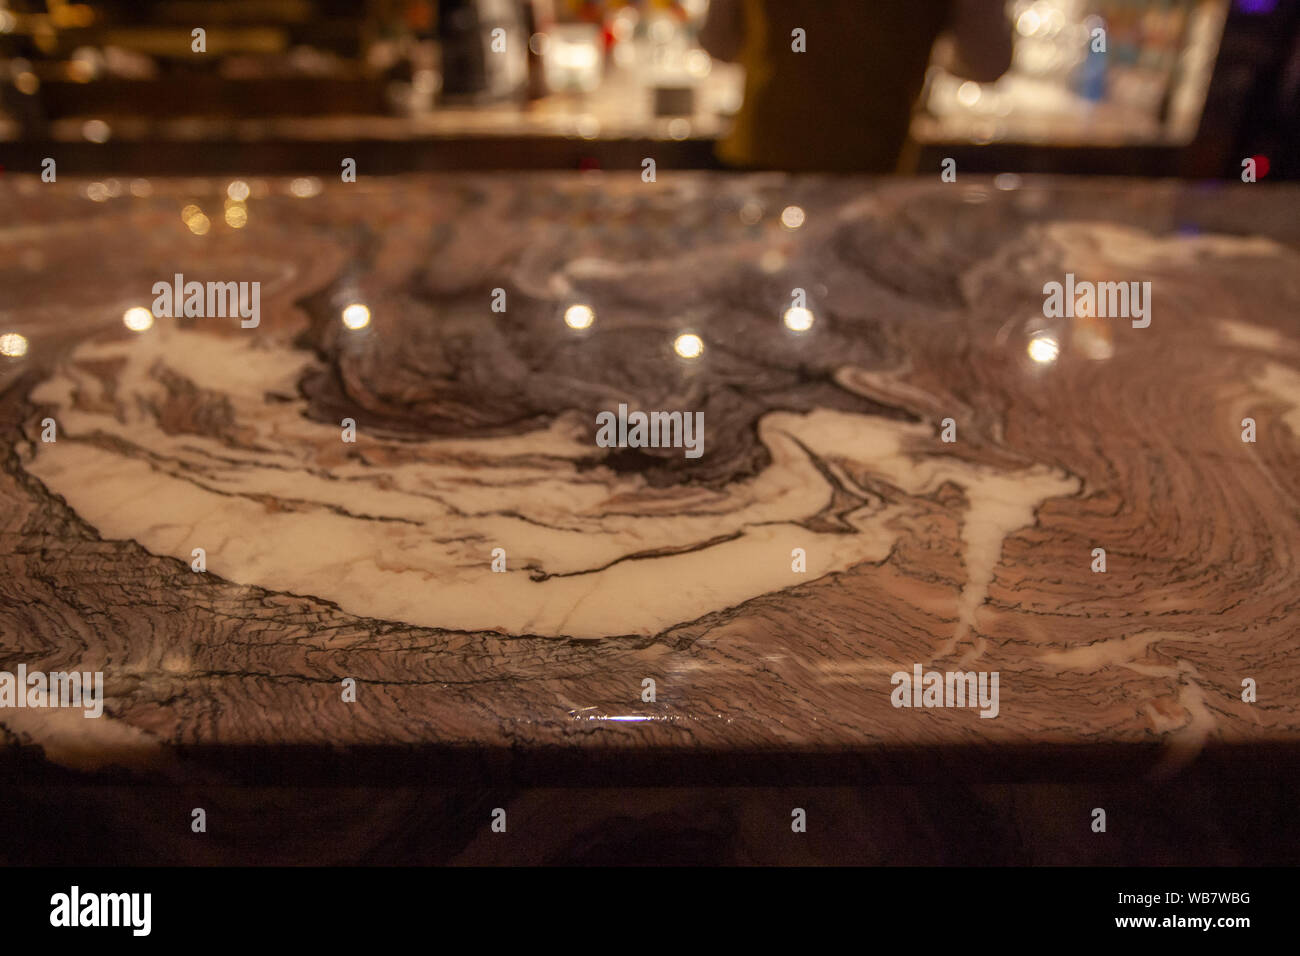 Bar counter detail made of gold-colored marble Stock Photo